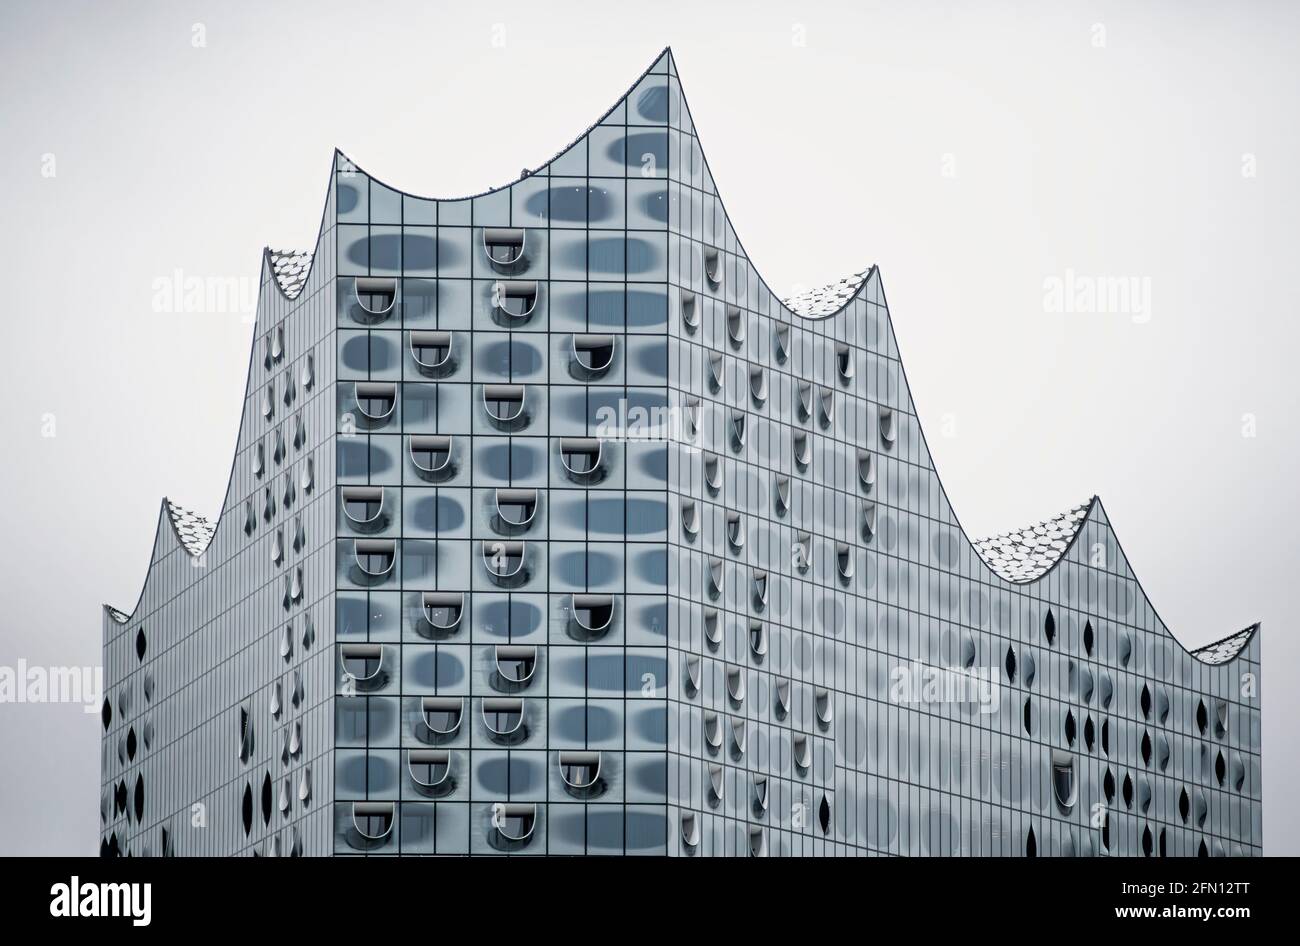 Elbphilharmonie  on the Grasbrook peninsula of the Elbe River. It is one of the largest and acoustically most advanced concert halls in the world. Stock Photo